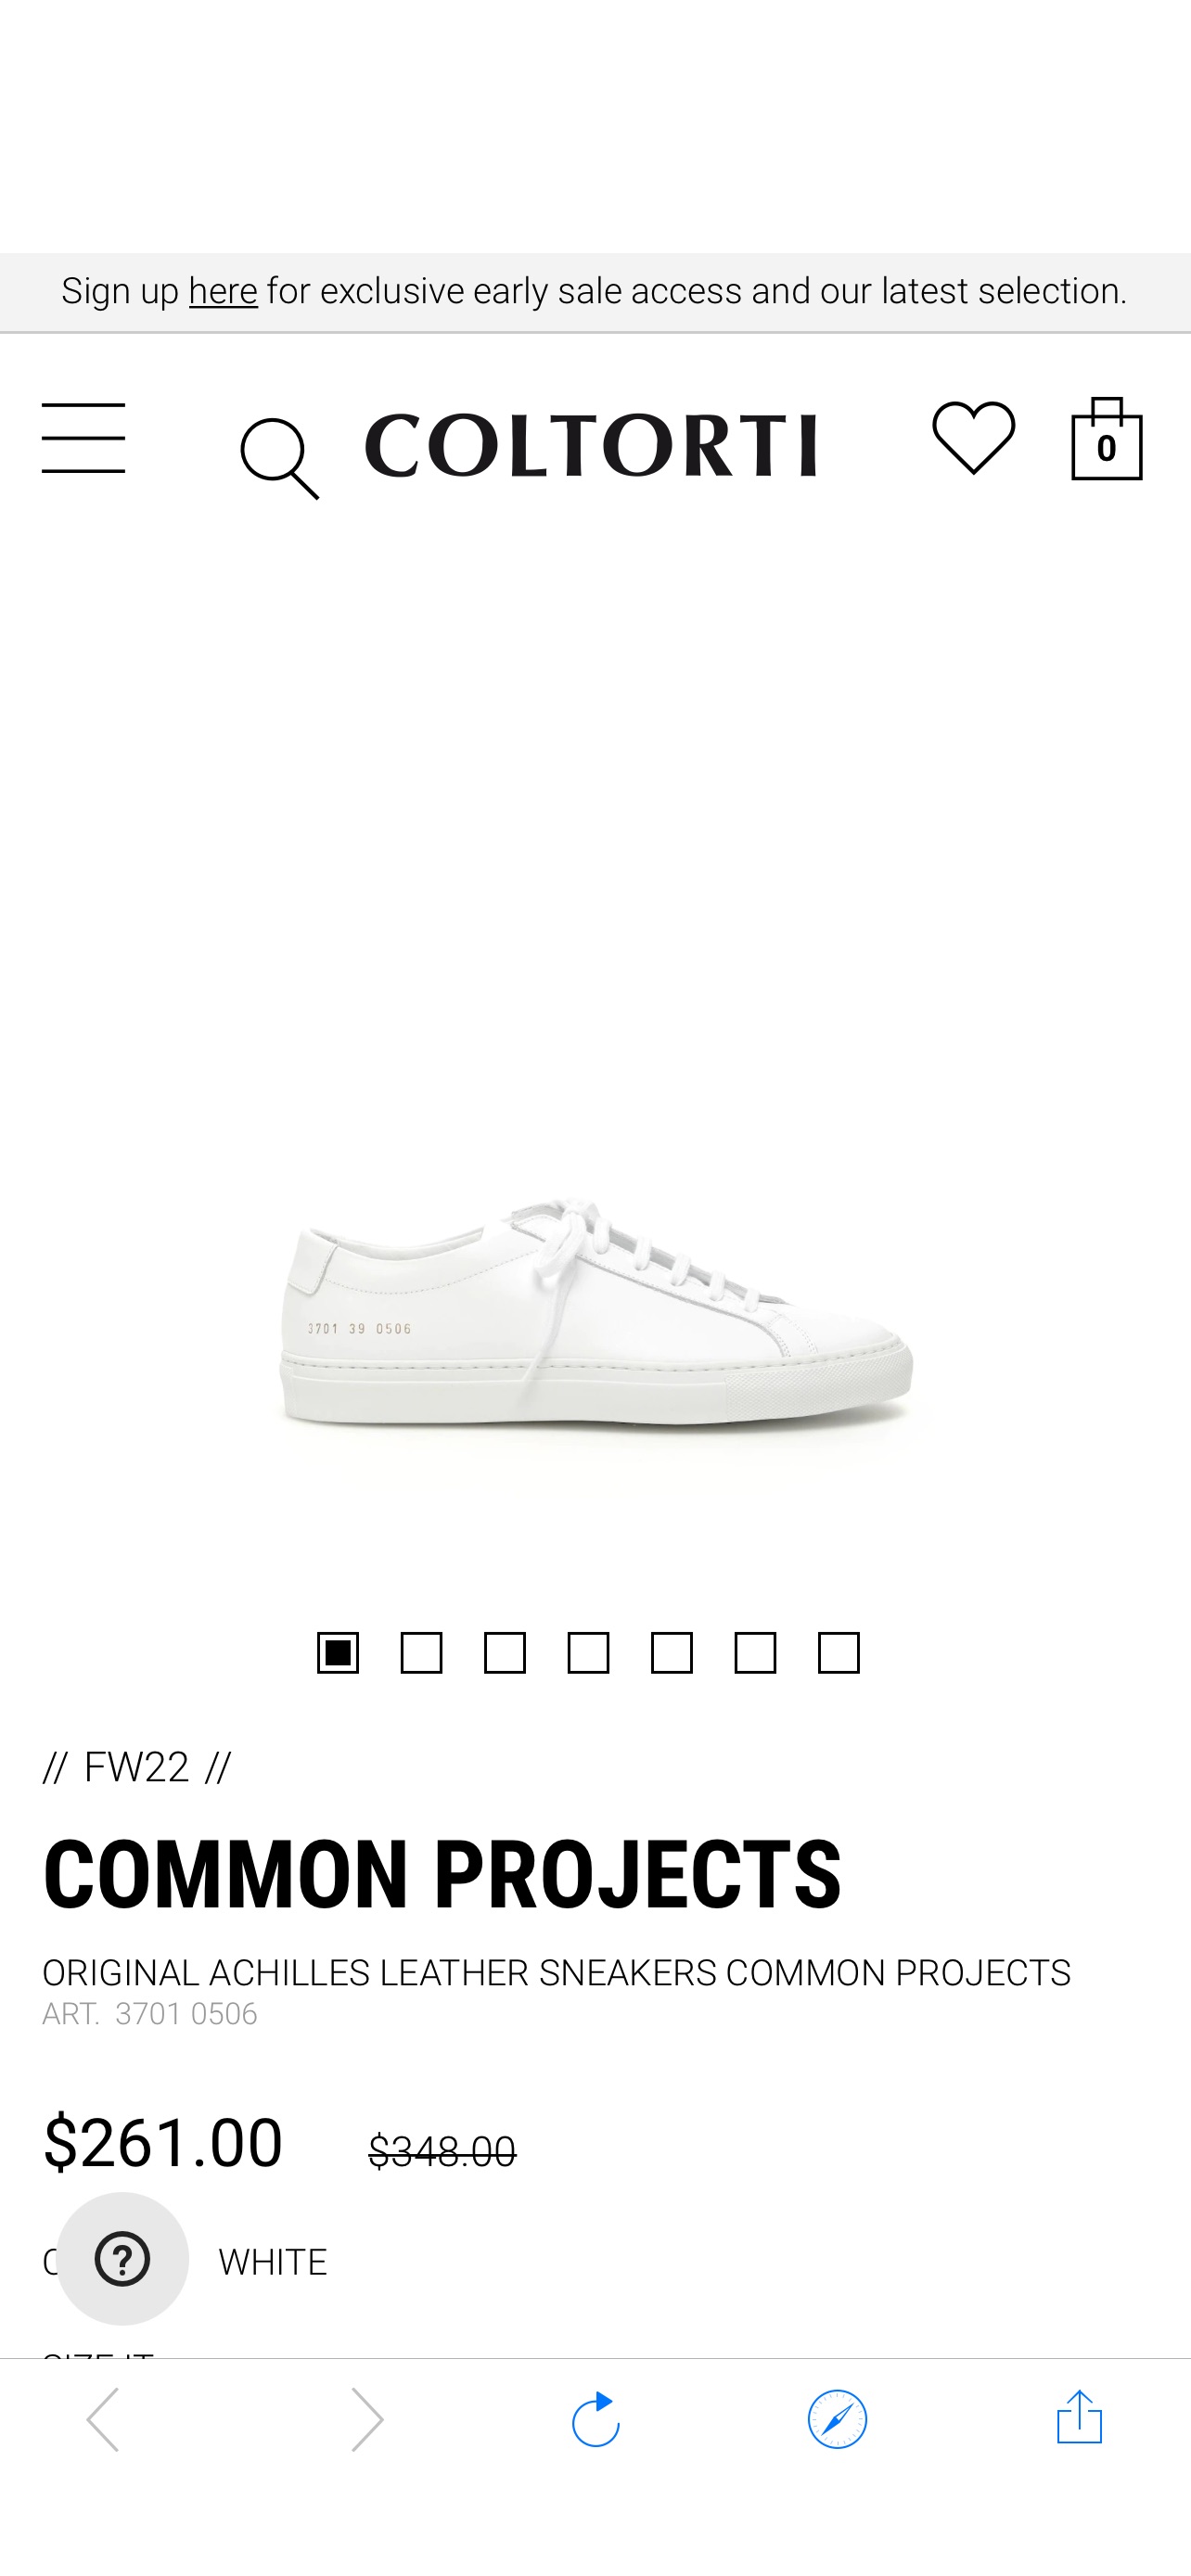 Women's Original Achilles Leather Sneakers by Common Projects | Coltorti Boutique